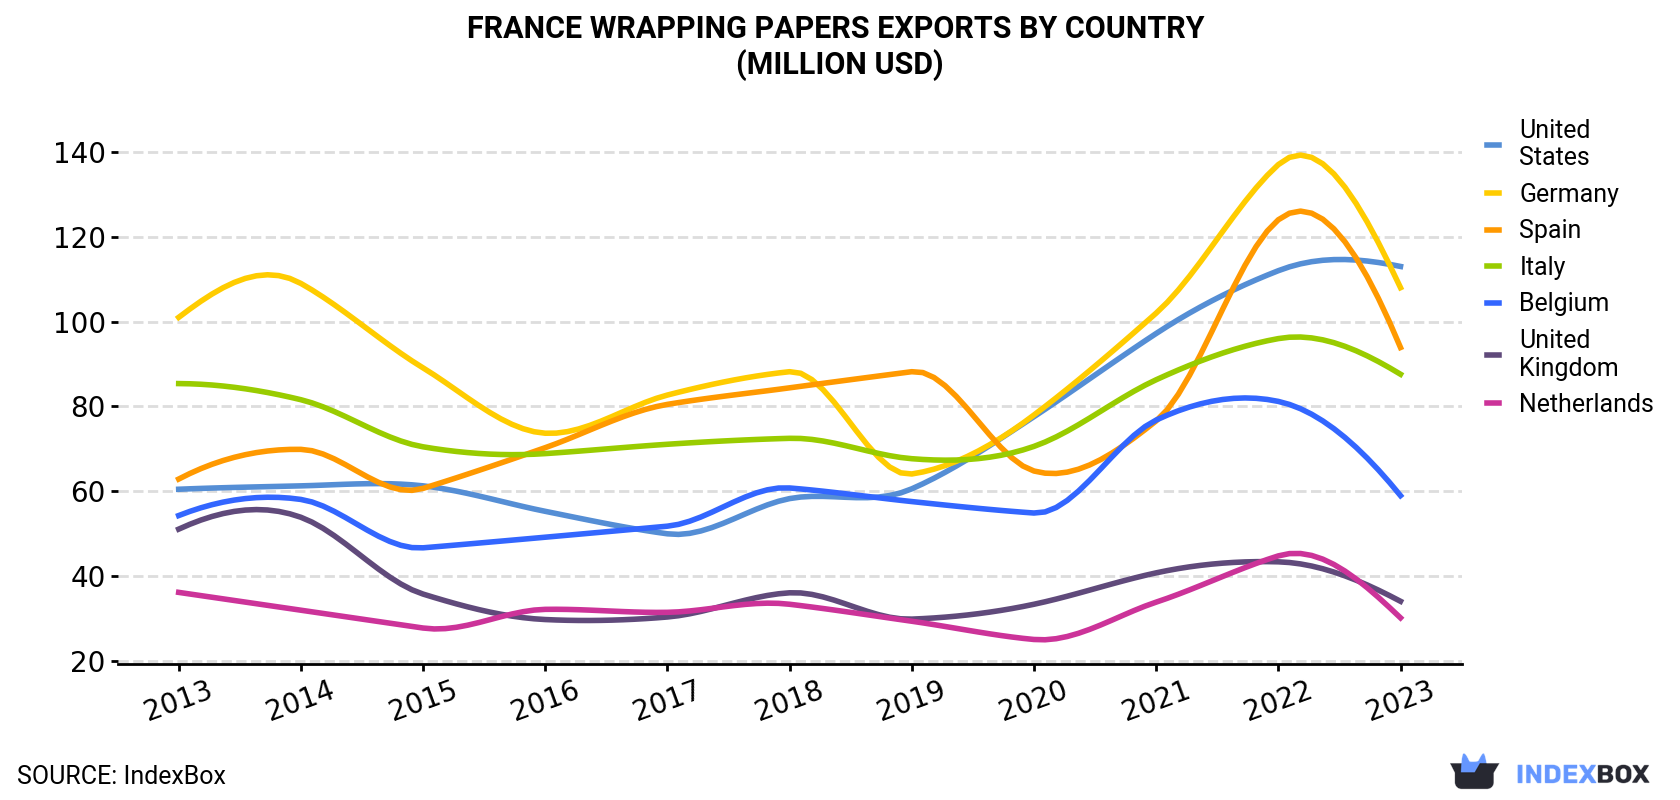 France Wrapping Papers Exports By Country (Million USD)